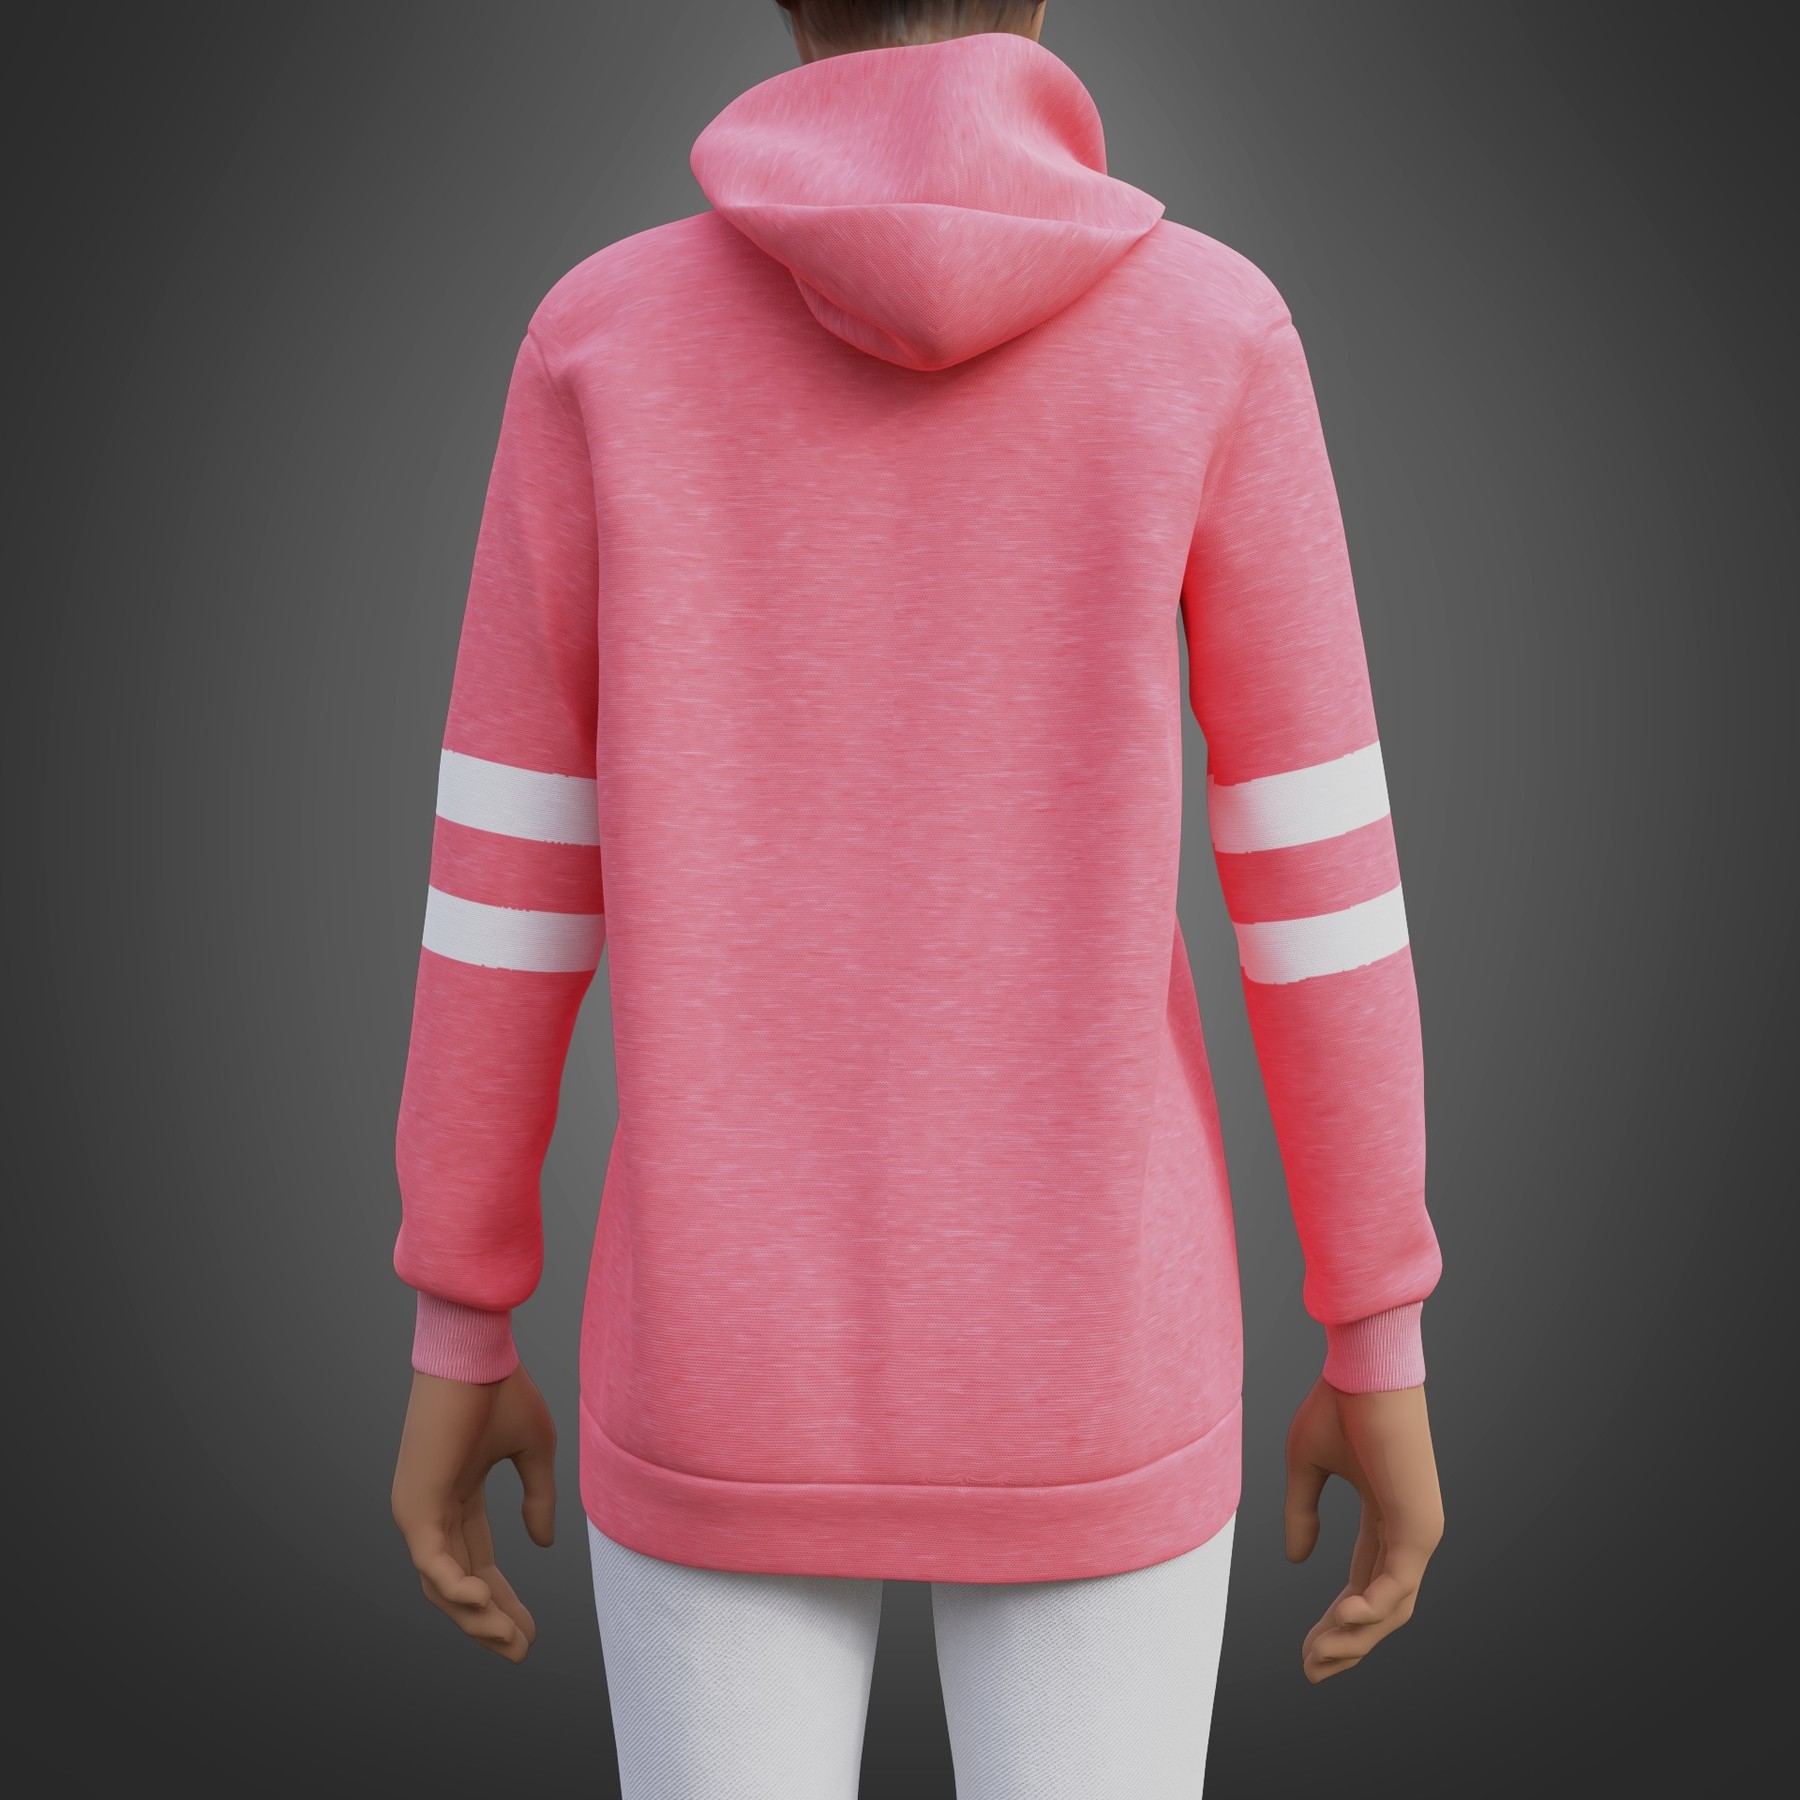 ArtStation - Cute outfit oversized - and Game Model leggings | pink 3D hoodie Assets